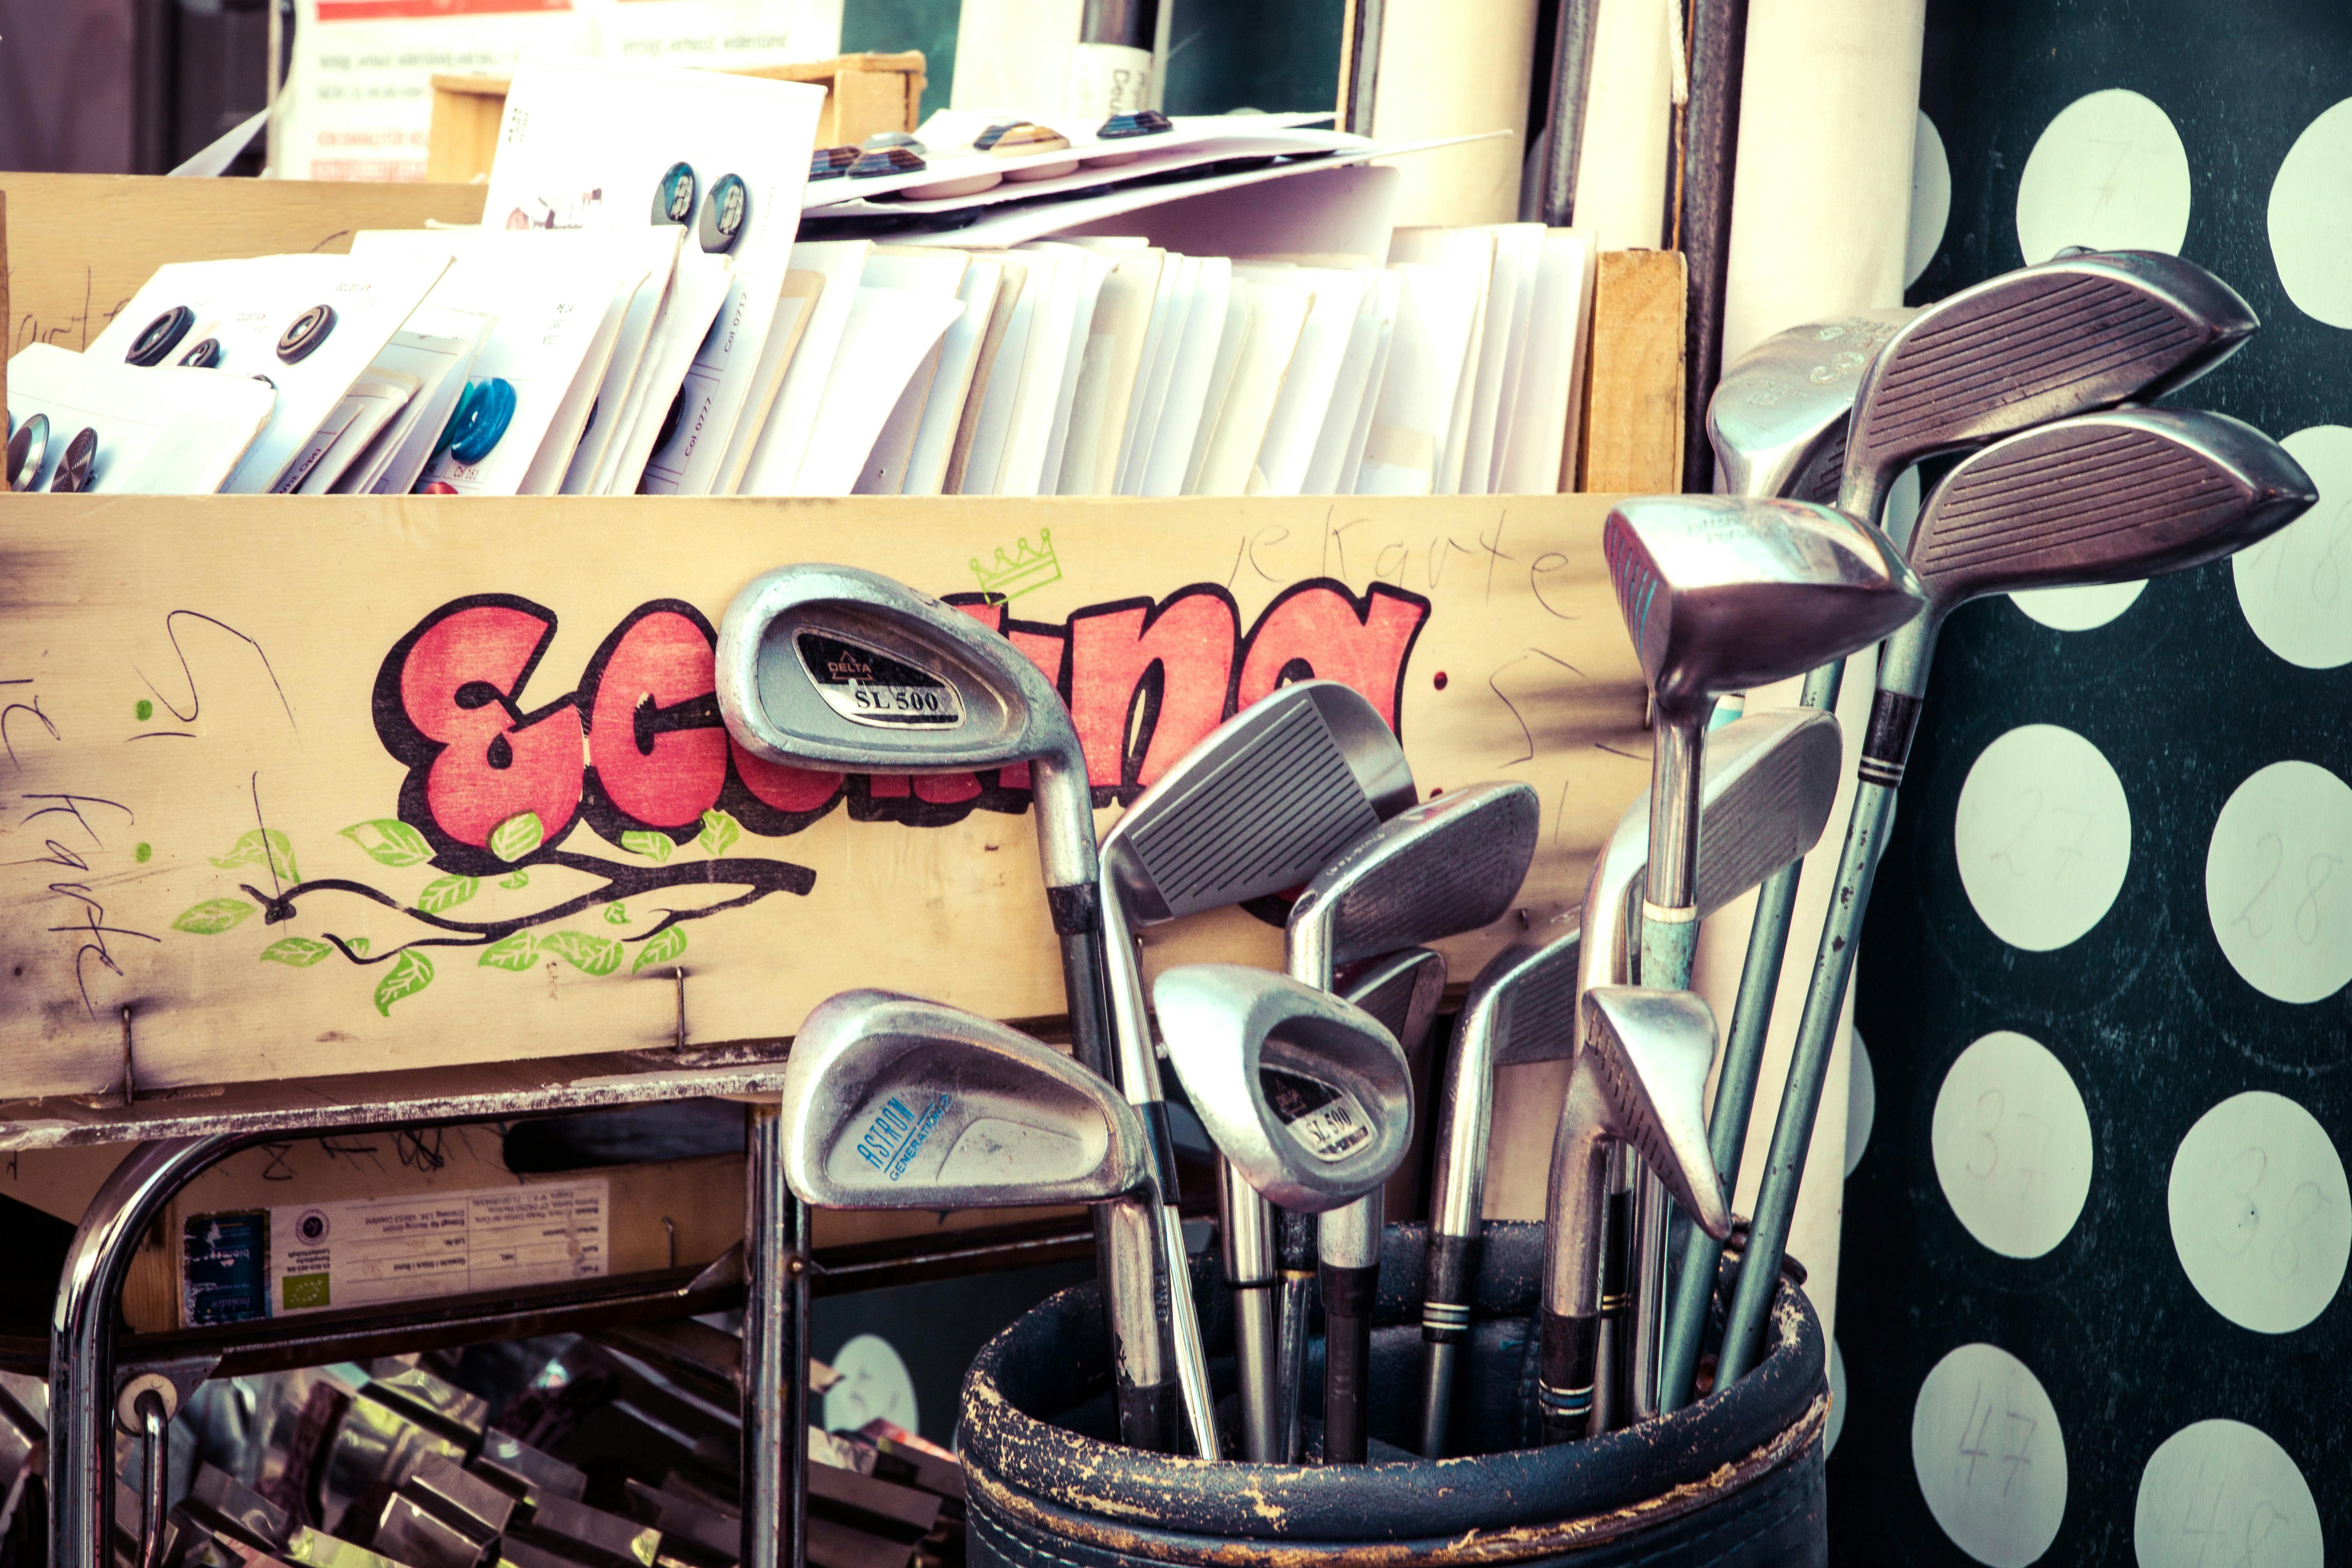 Golf clubs with a box of papers in the background